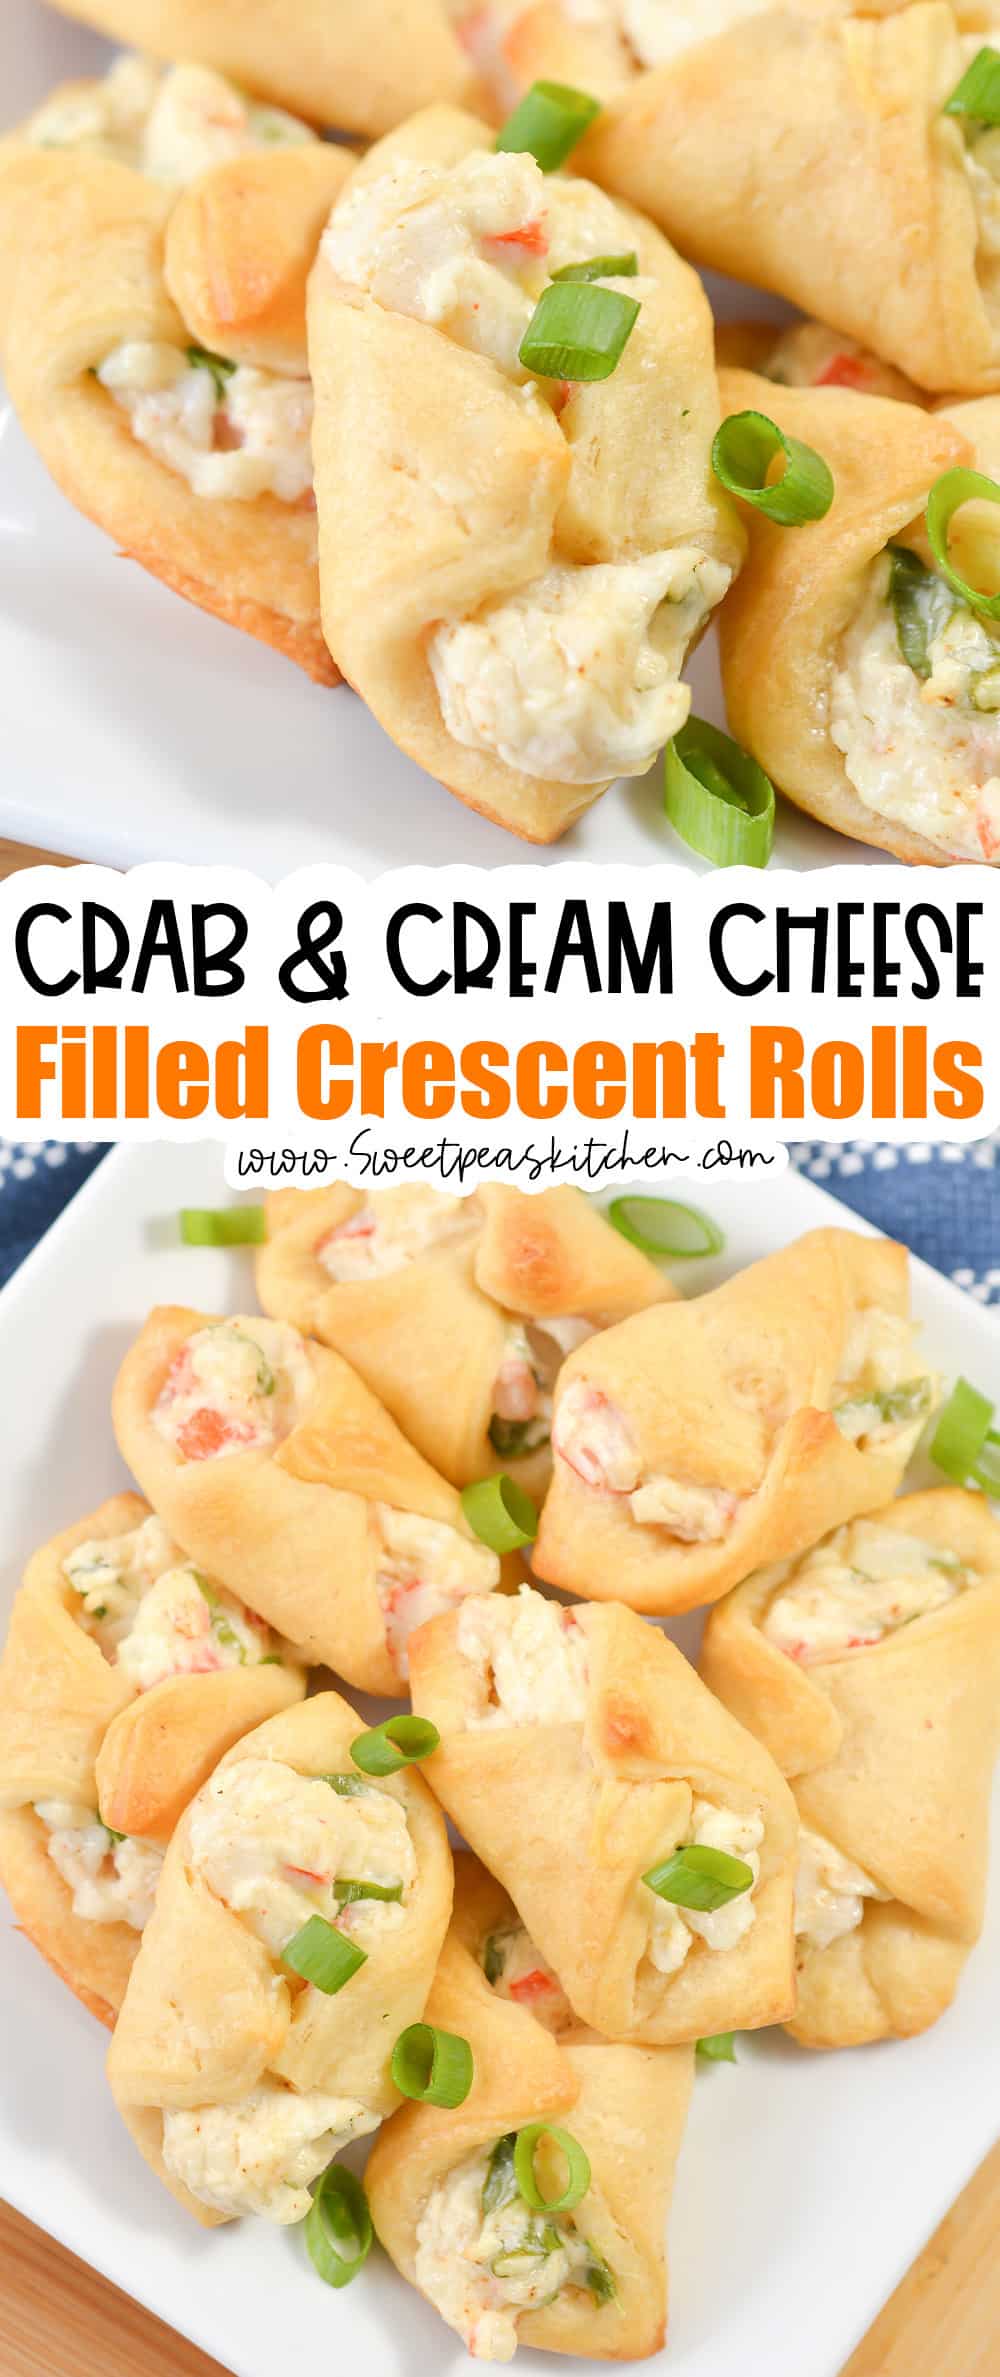 Crab and Cream Cheese Filled Crescent Rolls on Pinterest